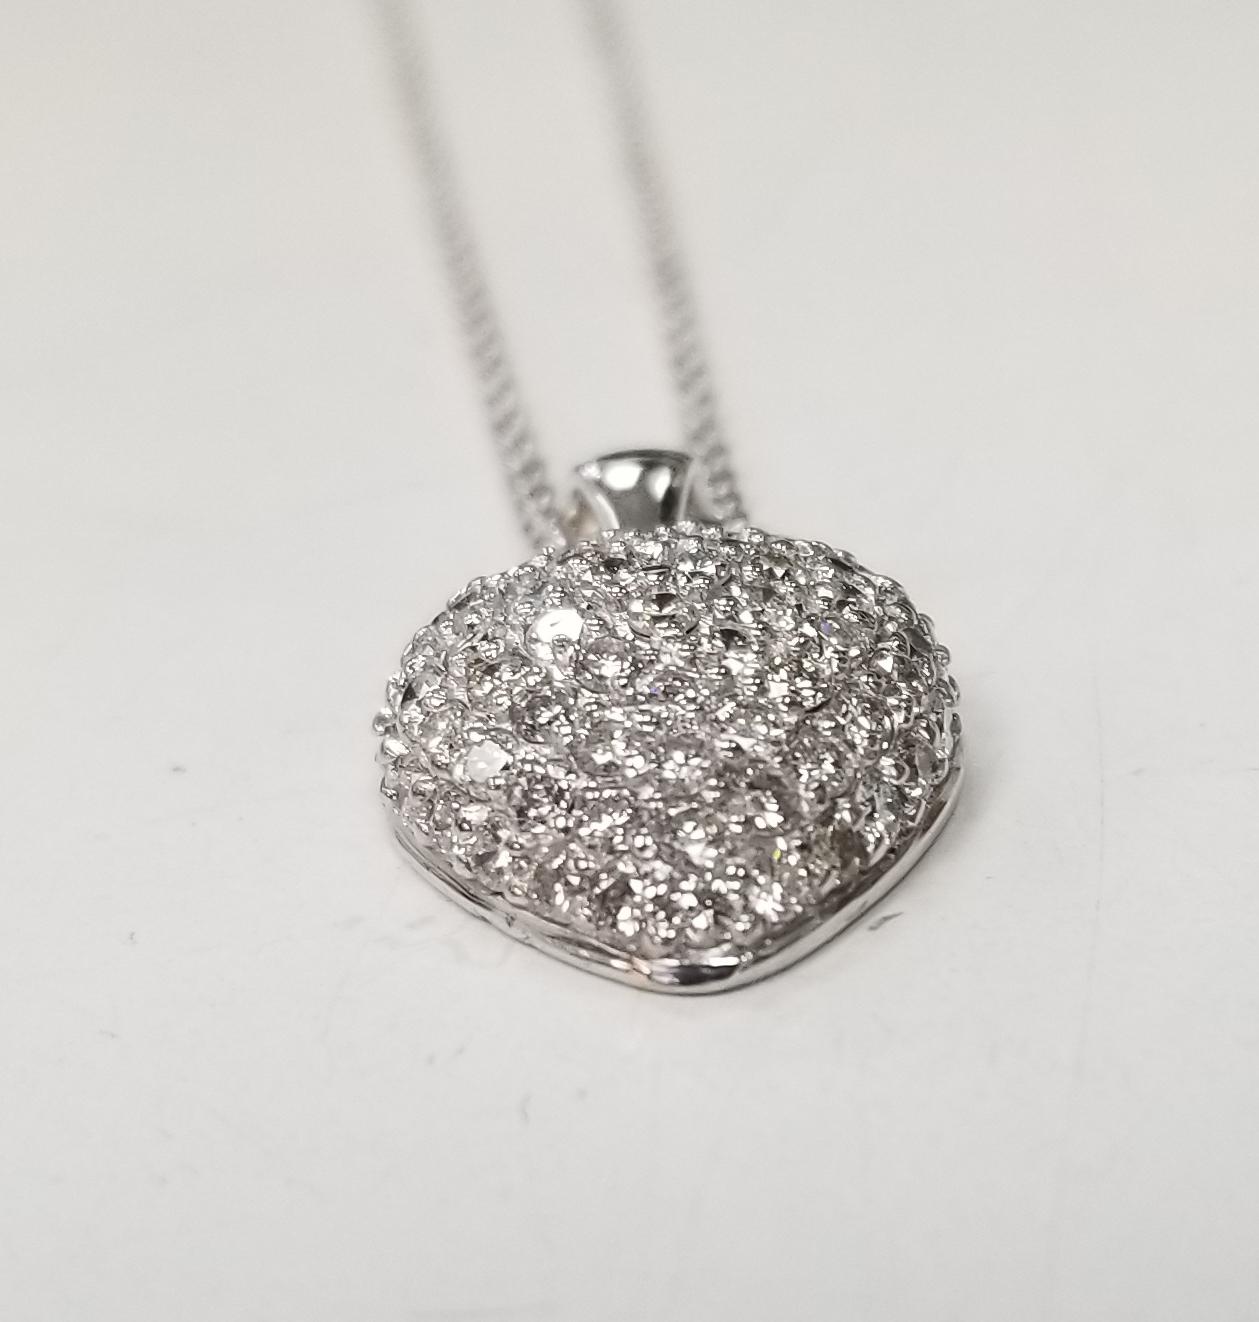 14k white gold diamond puffed heart, containing 65 round full cut diamonds of very fine quality weighing 1.61cts. on a 16 inch link chain.